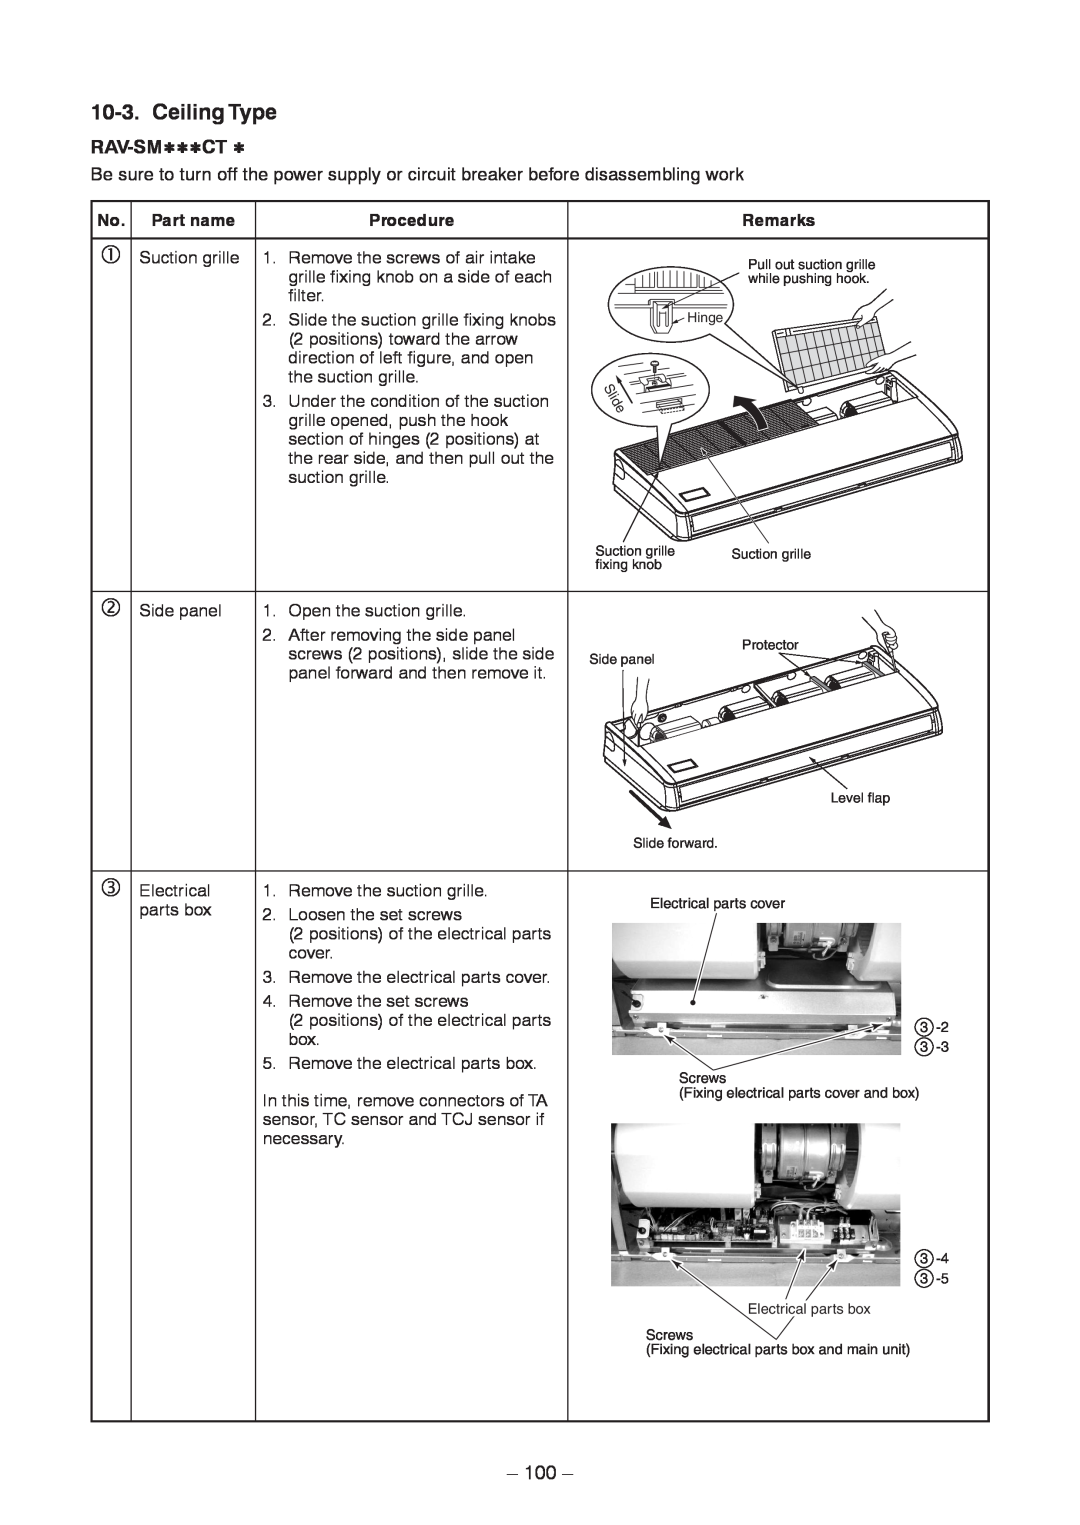 Toshiba CEILING TYPE, CONCEALED DUCK TYPE service manual Ceiling Type, 100, No. Part name, Procedure, Remarks 